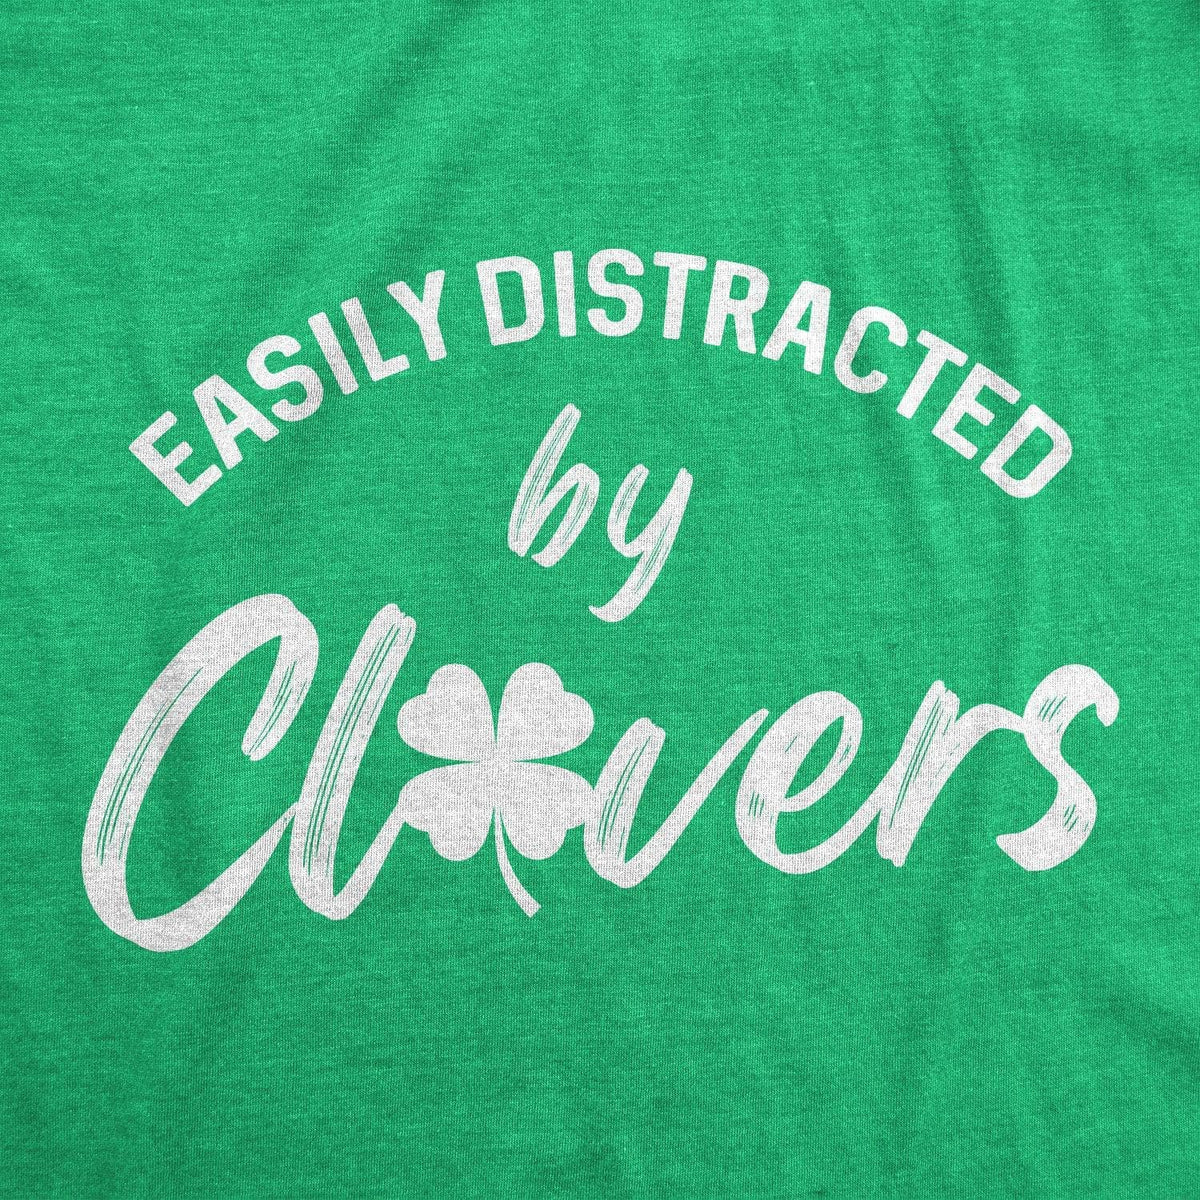 Easily Distracted By Clovers Women&#39;s Tshirt  -  Crazy Dog T-Shirts